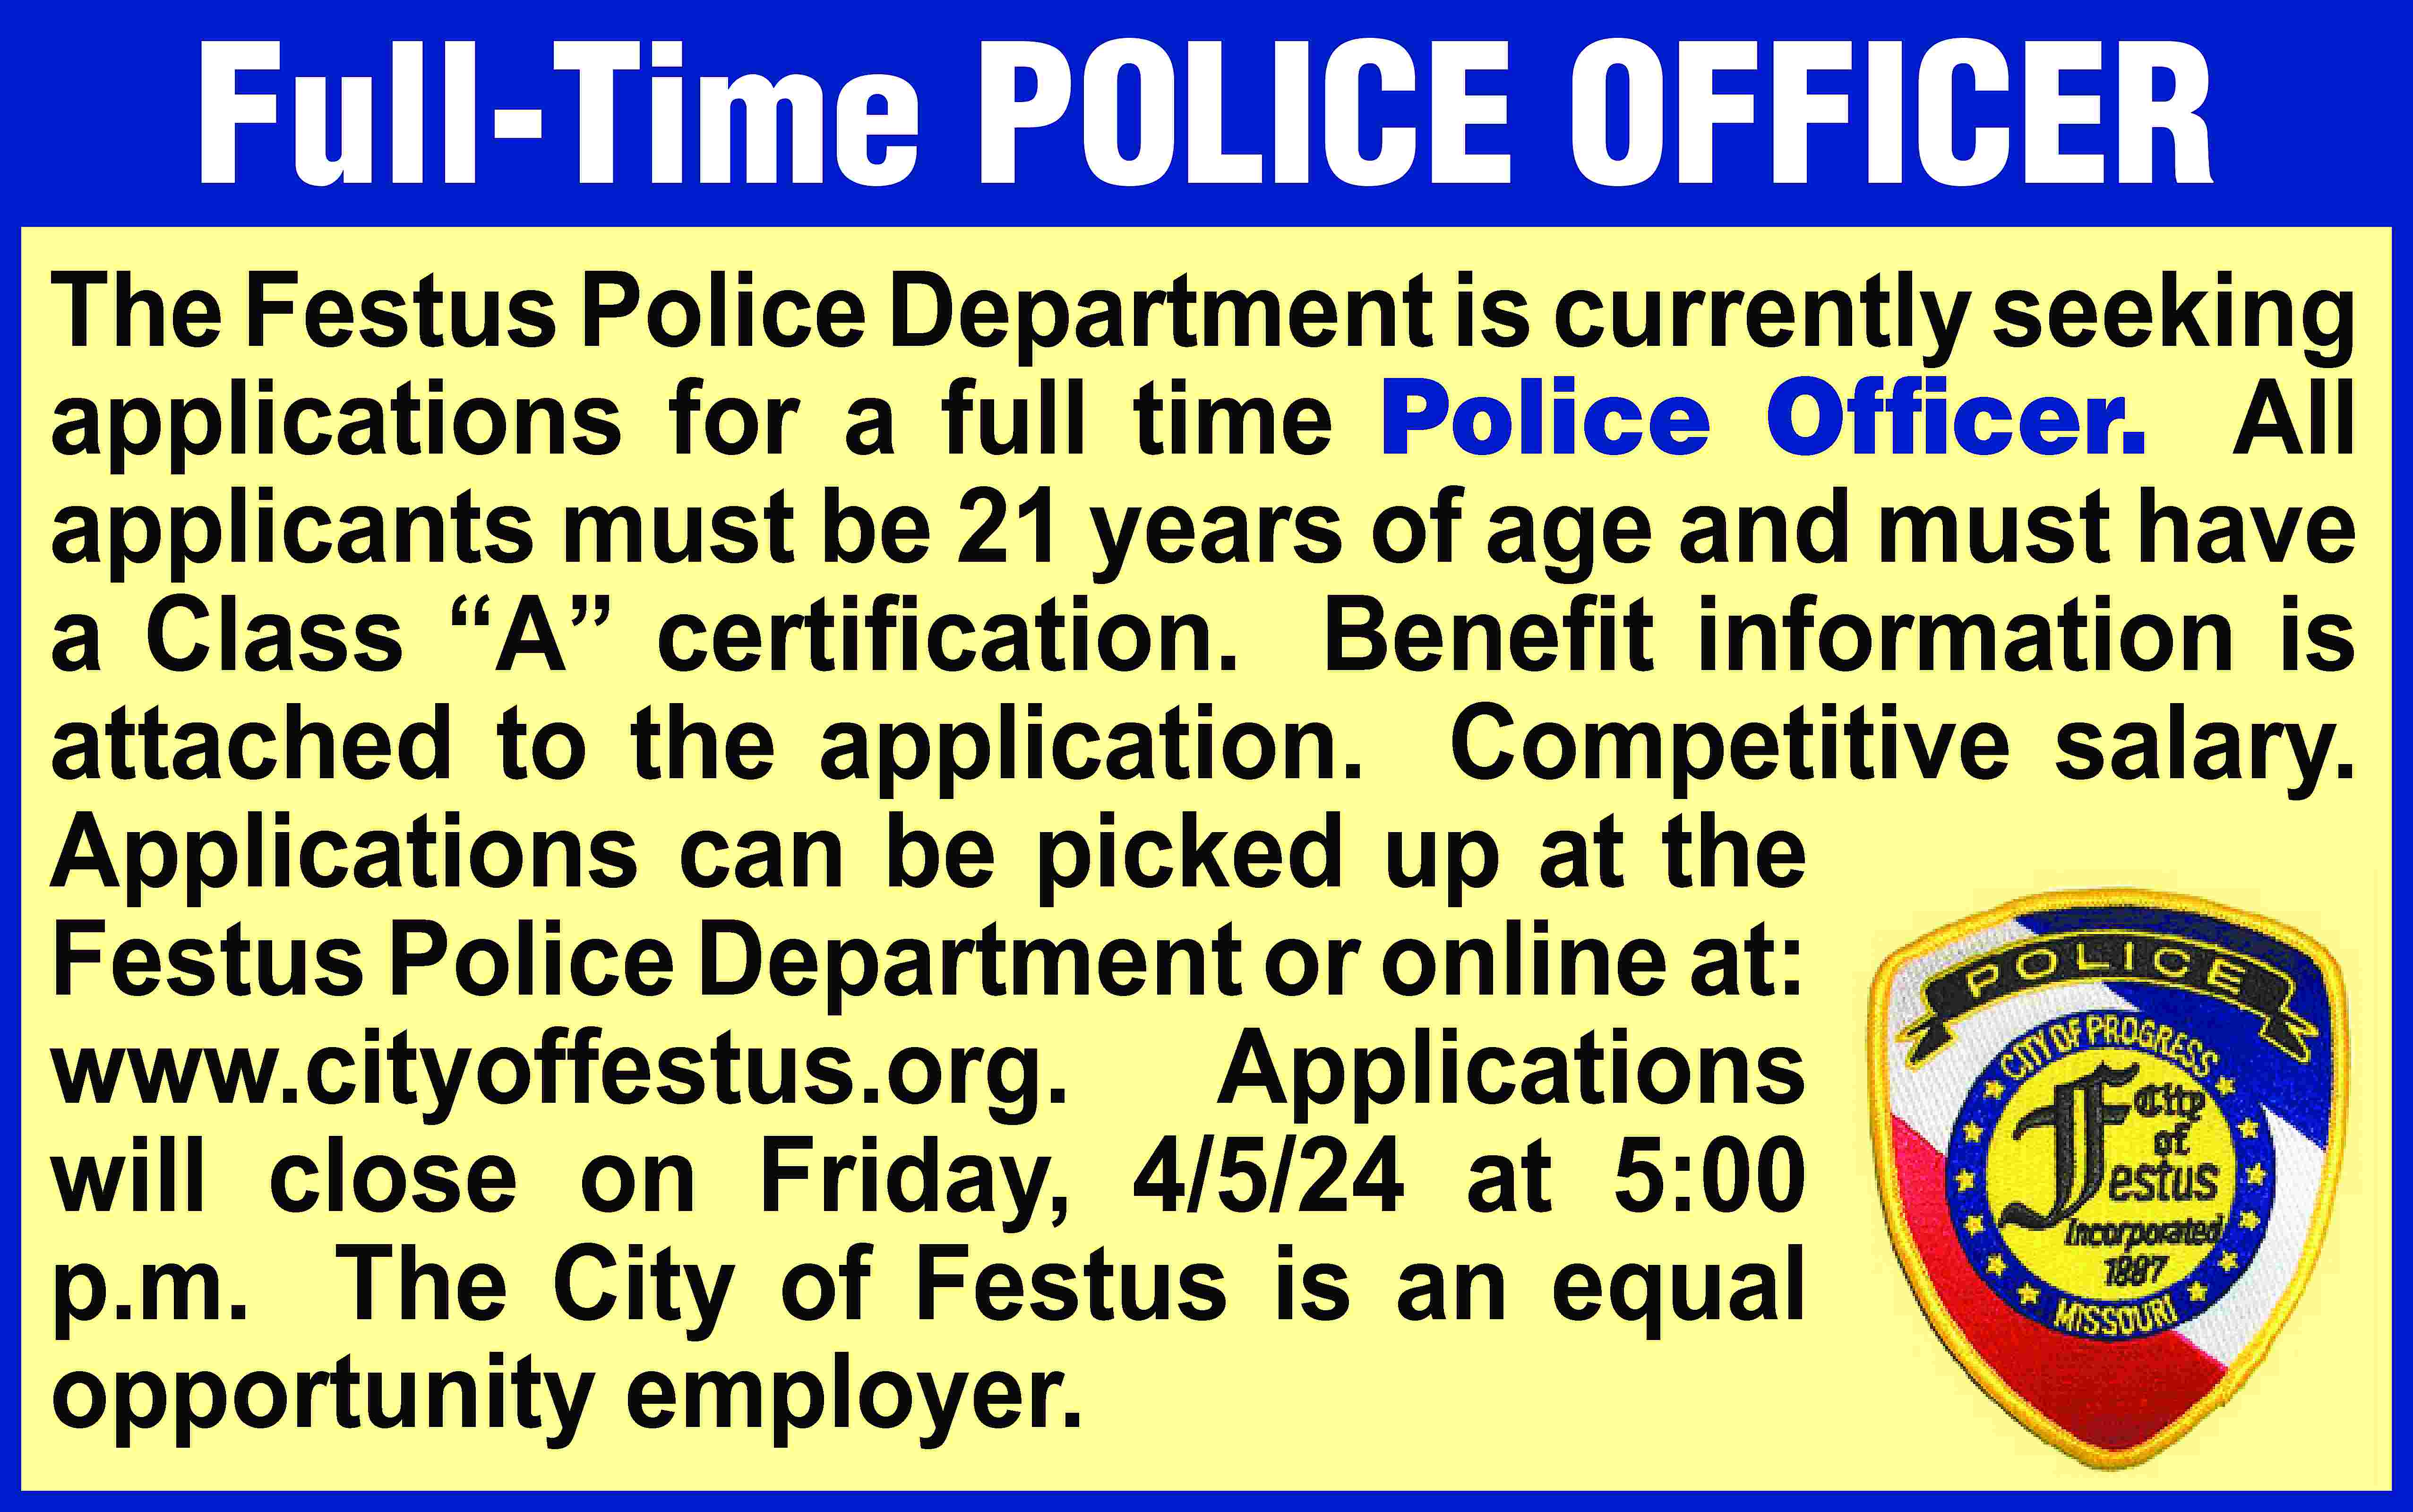 Full-Time POLICE OFFICER The Festus  Full-Time POLICE OFFICER The Festus Police Department is currently seeking applications for a full time Police Officer. All applicants must be 21 years of age and must have a Class “A” certiﬁcation. Beneﬁt information is attached to the application. Competitive salary. Applications can be picked up at the Festus Police Department or online at: www.cityoffestus.org. Applications will close on Friday, 4/5/24 at 5:00 p.m. The City of Festus is an equal opportunity employer.